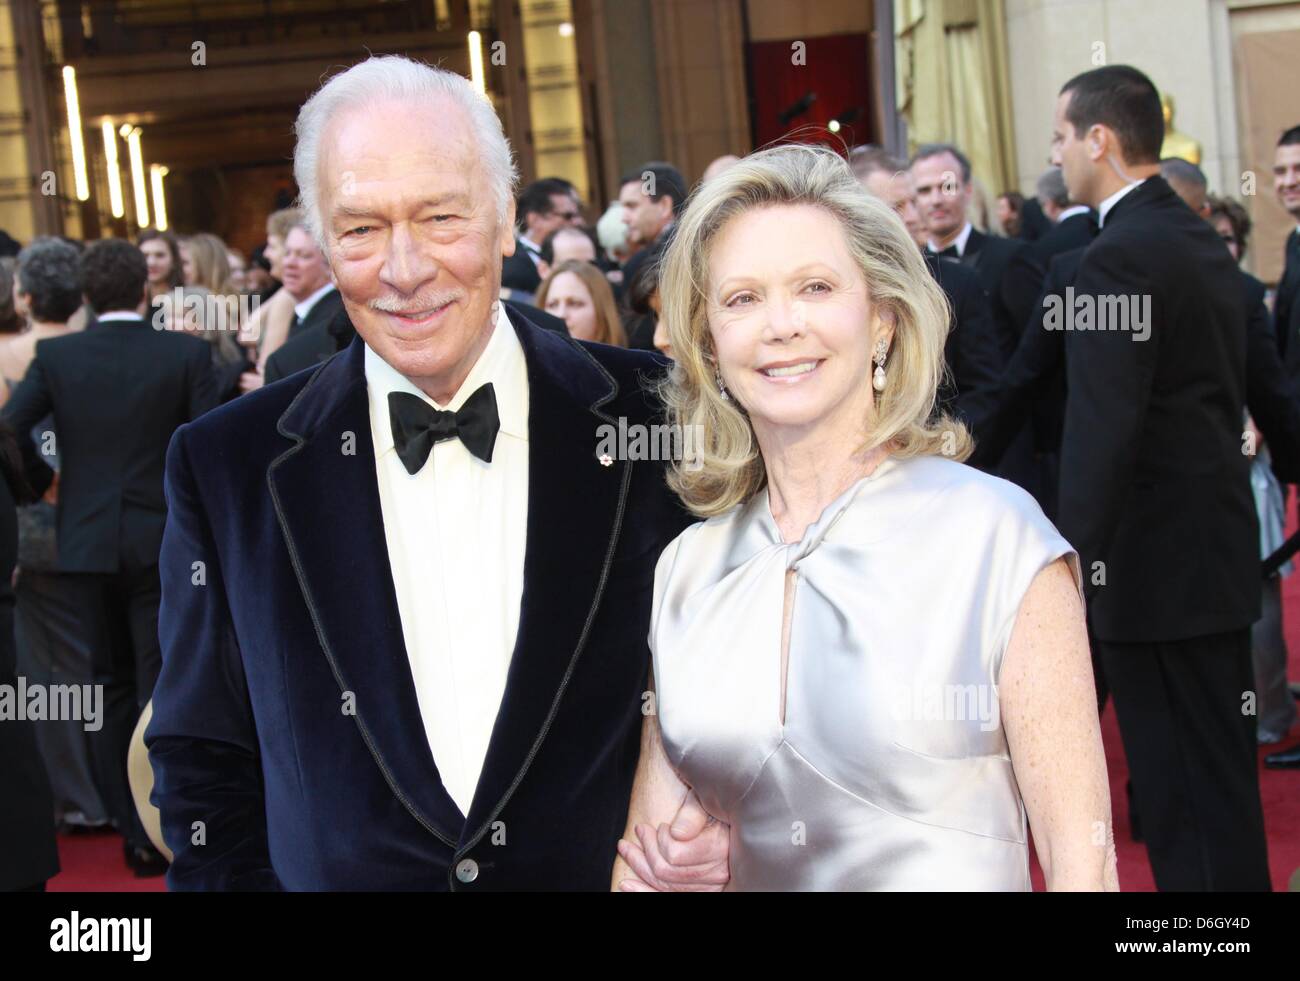 Canadian actor Christopher Plummer and wife Elaine Taylor arrive at the 84th Annual Academy Awards aka Oscars at Kodak Theatre in Los Angeles, USA, on 26 February 2012. Photo: Hubert Boesl Stock Photo